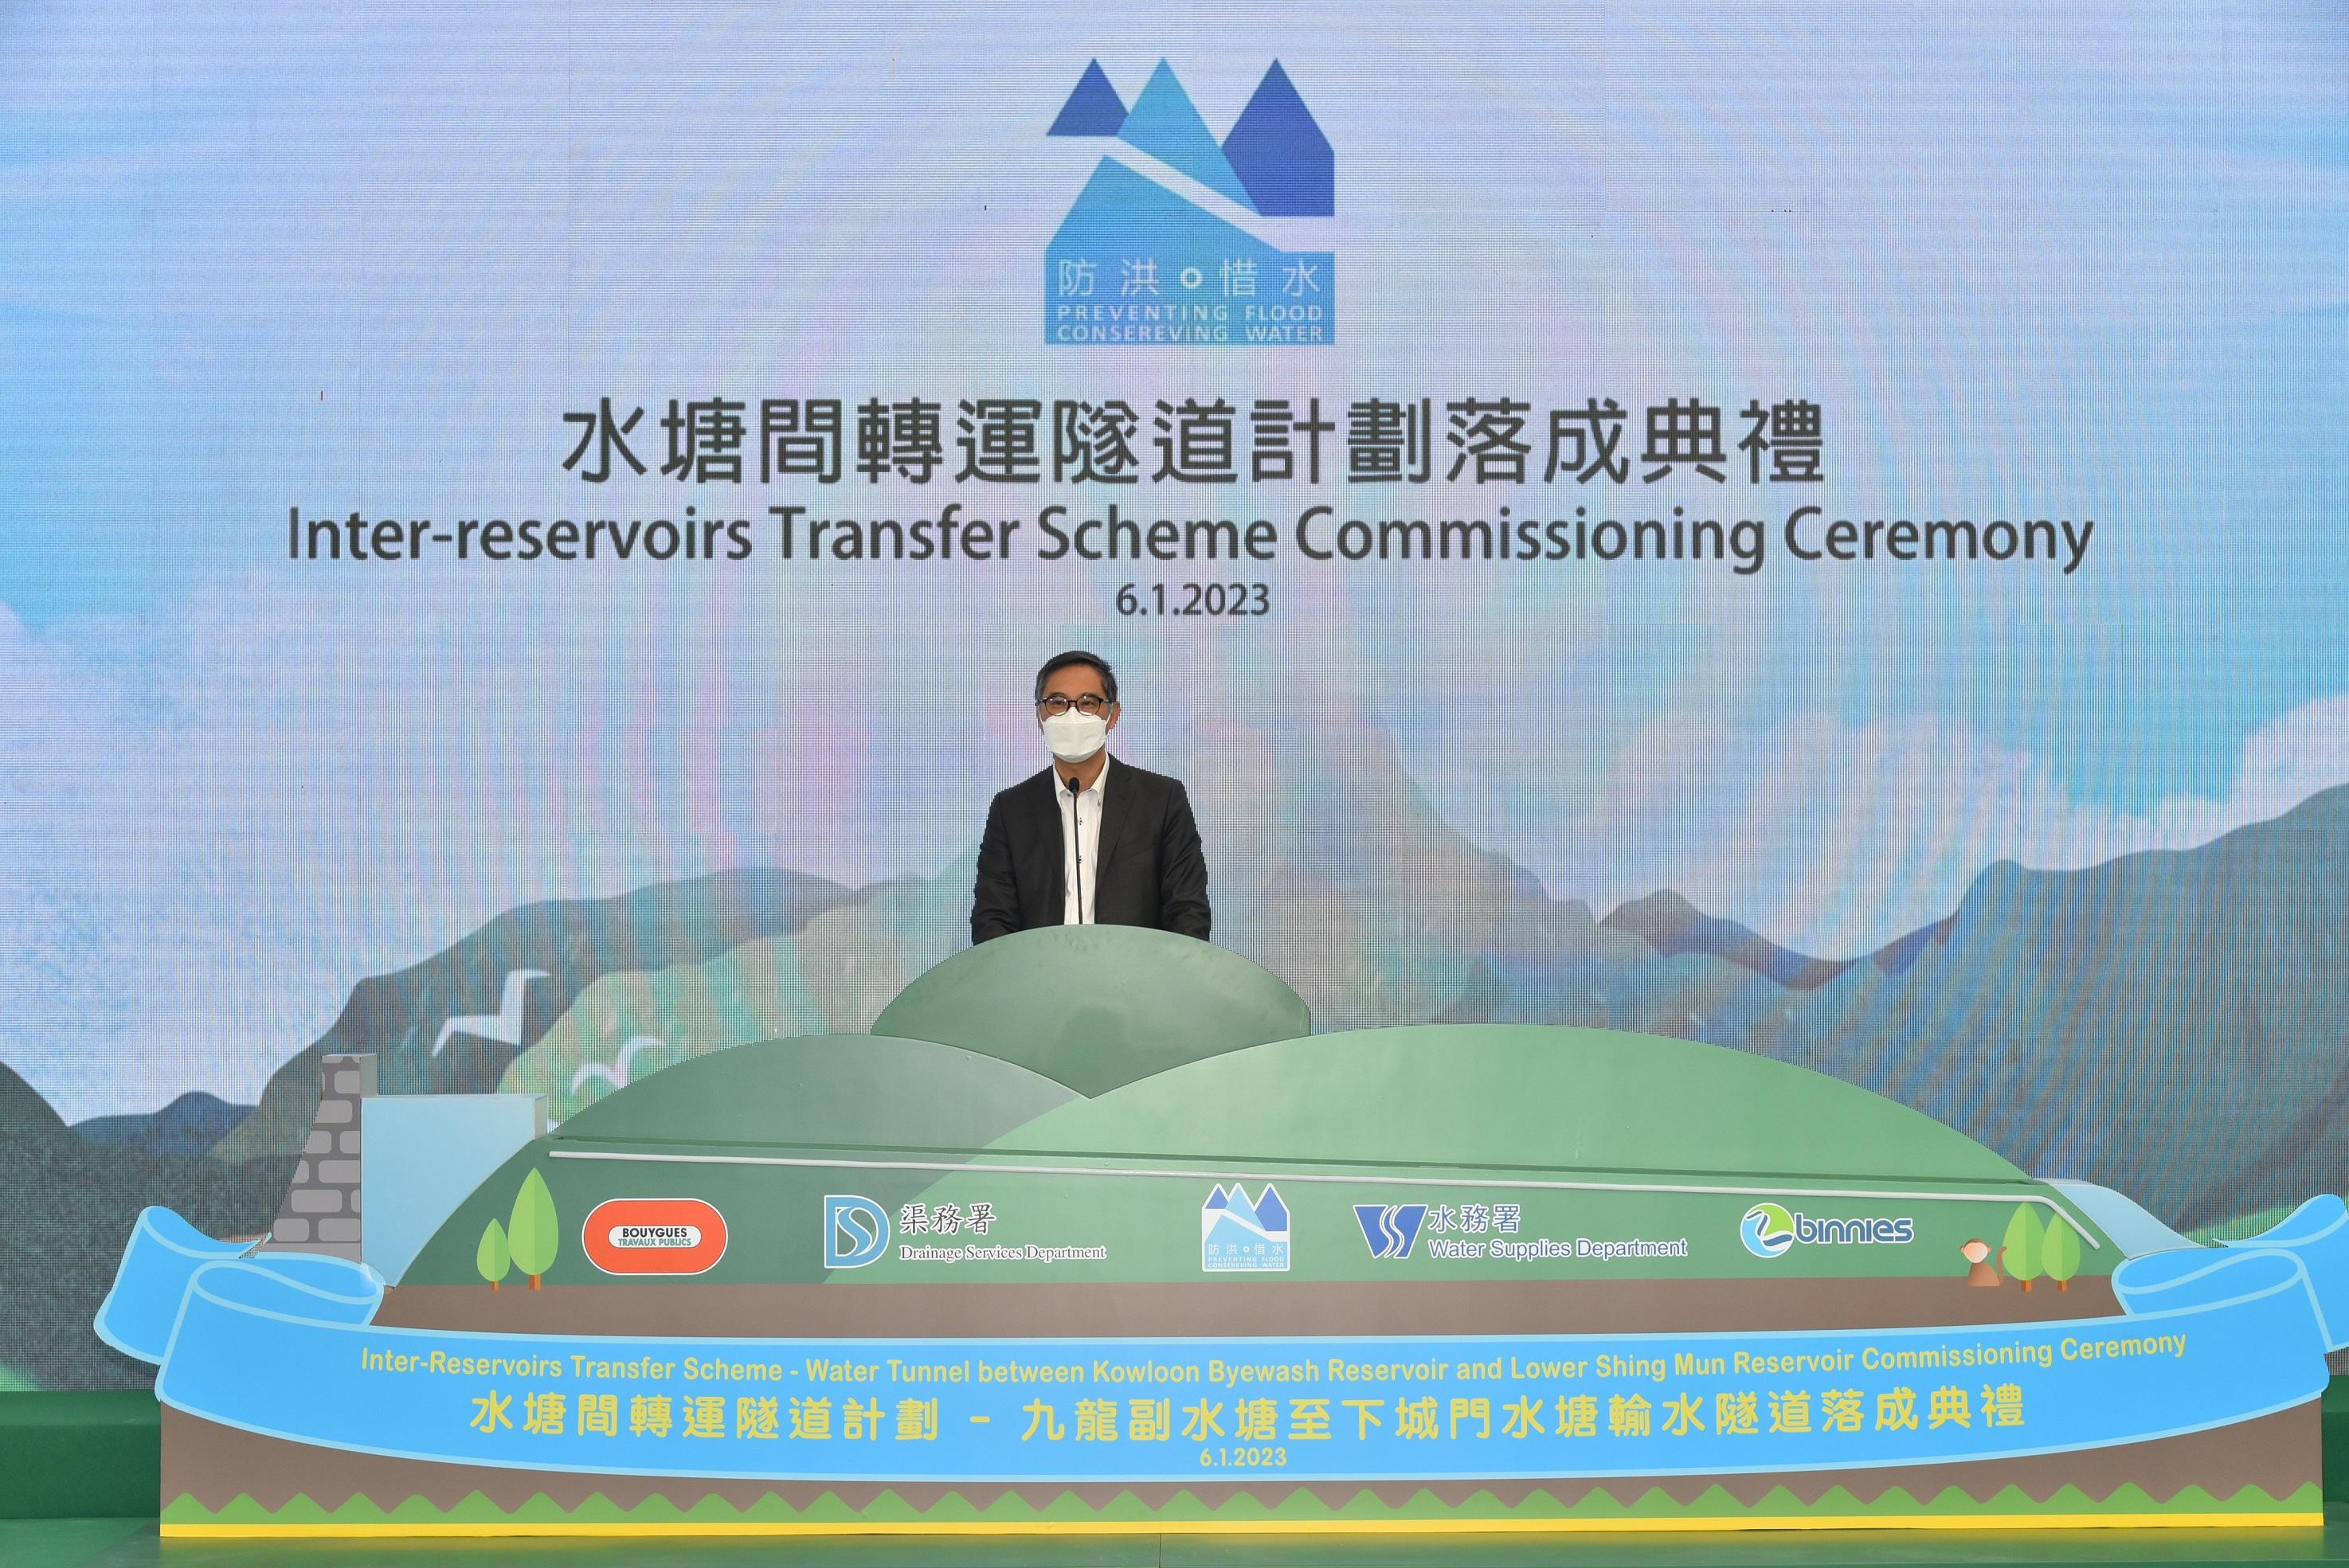 The Drainage Services Department (DSD) today (January 6) held a commissioning ceremony for the Inter-reservoirs Transfer Scheme - Water Tunnel between Kowloon Byewash Reservoir and Lower Shing Mun Reservoir. Photo shows the Permanent Secretary for Development (Works), Mr Ricky Lau, speaking at the ceremony.